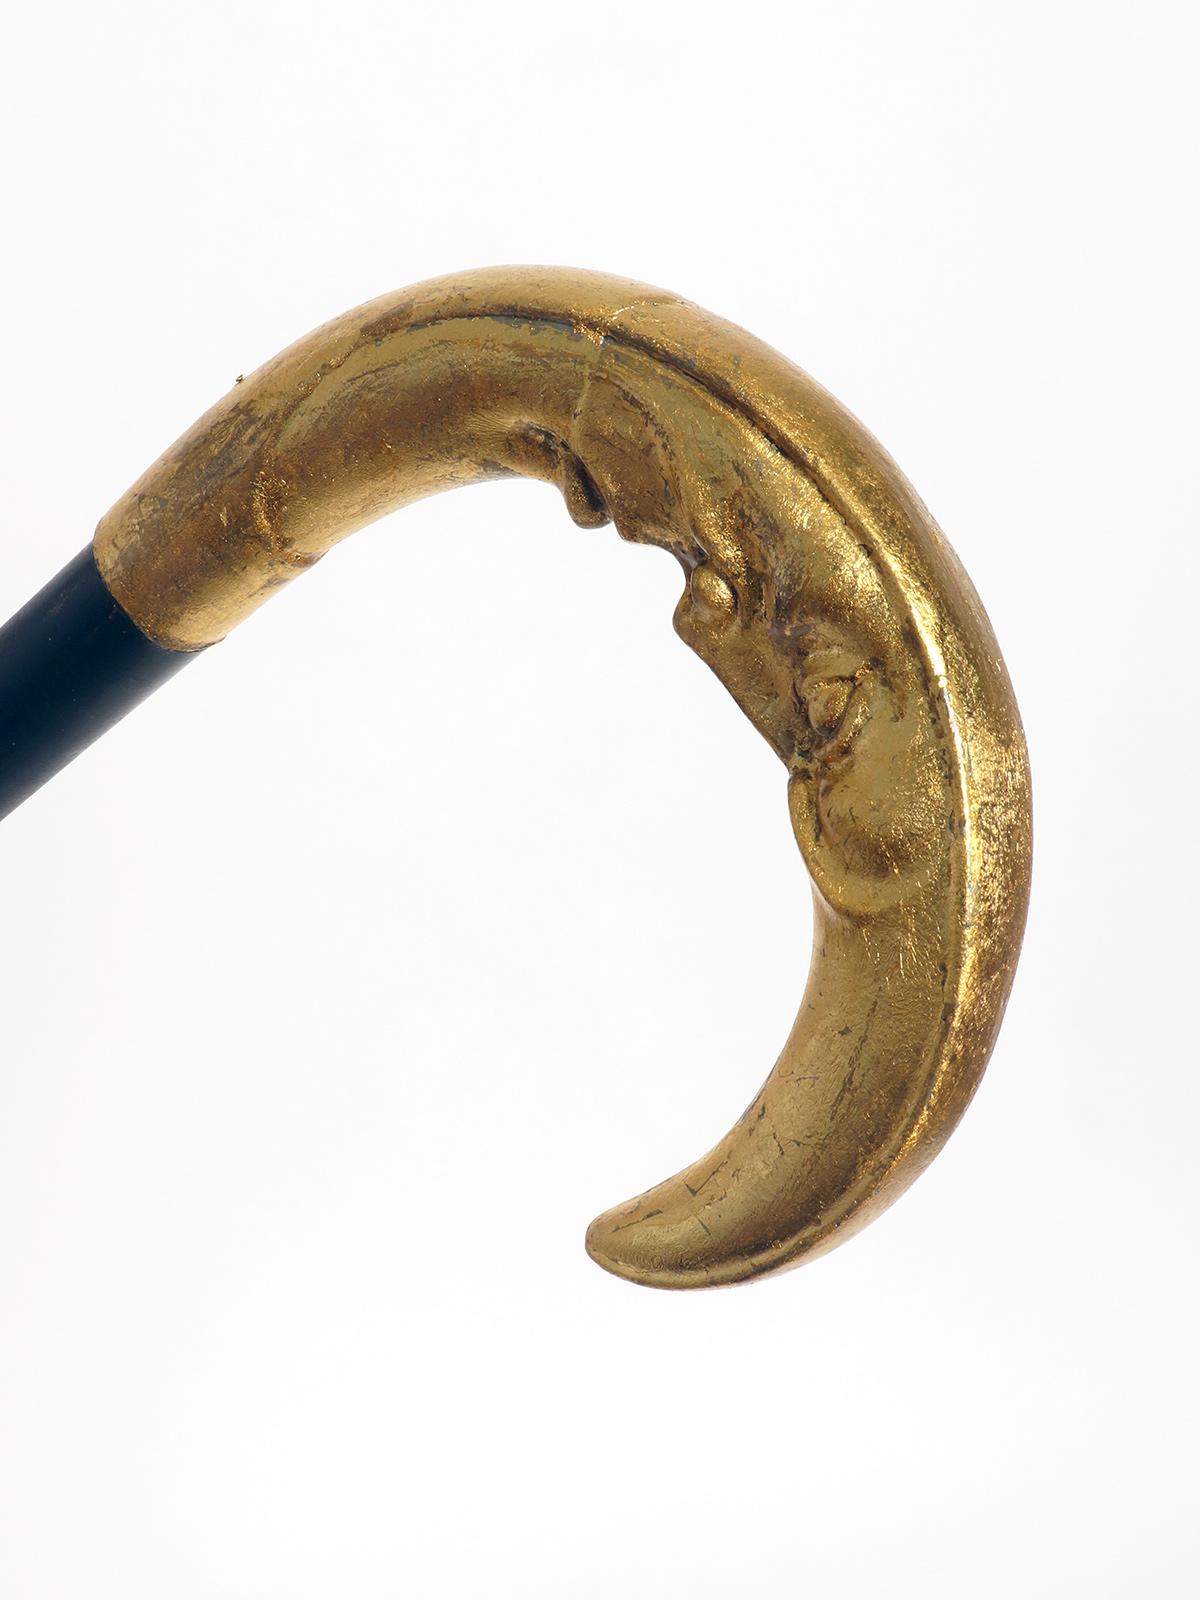 20th Century Silver handle walking stick depicting a crescent moon, France 1900. For Sale